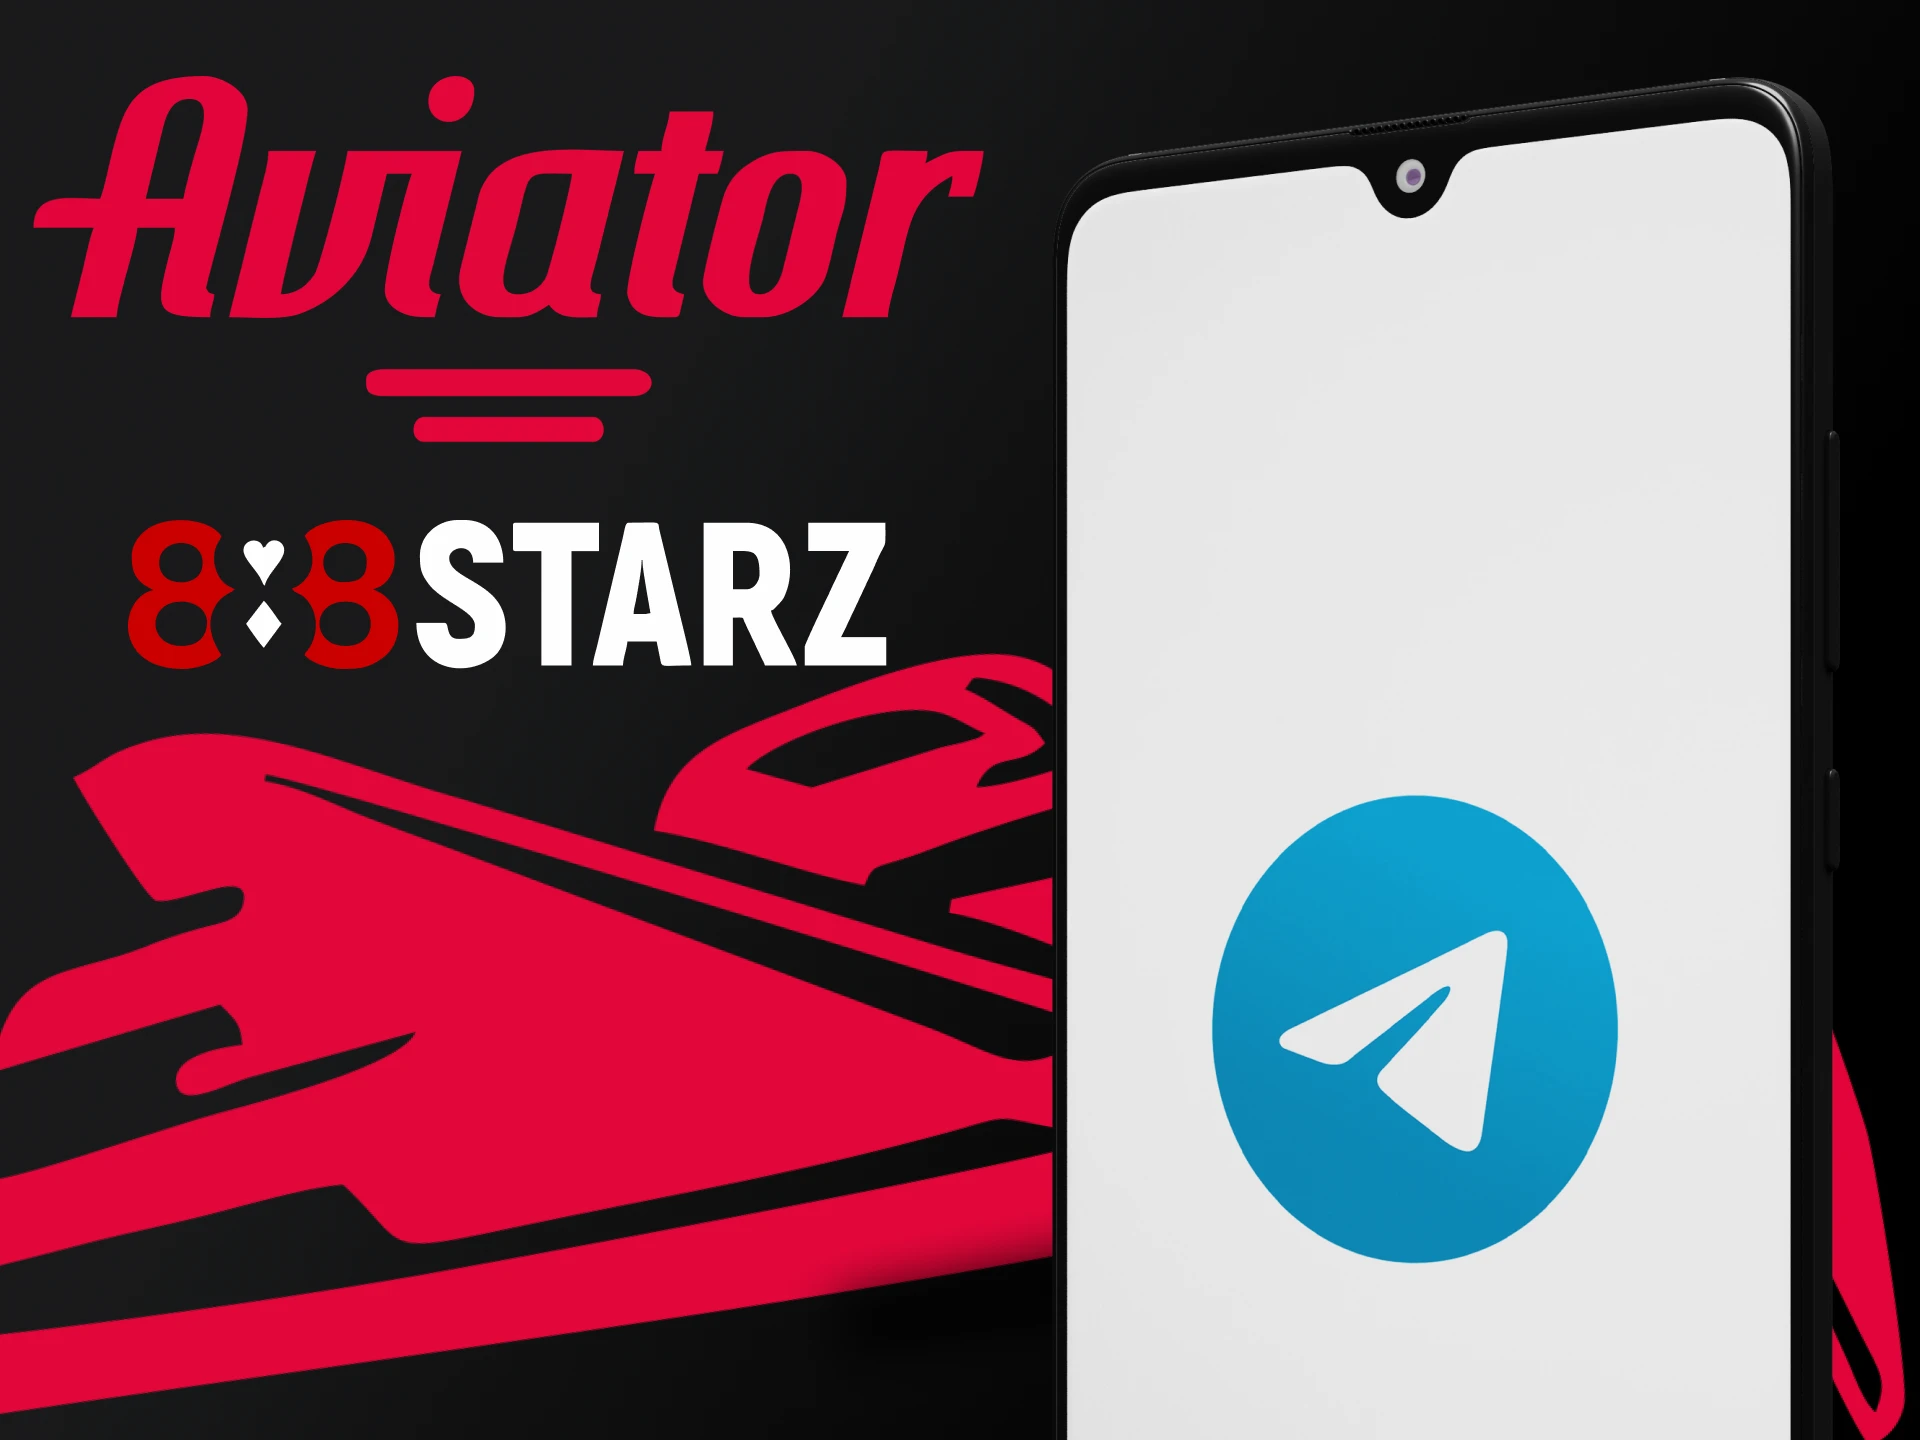 Use signal for Aviator from 888starz.